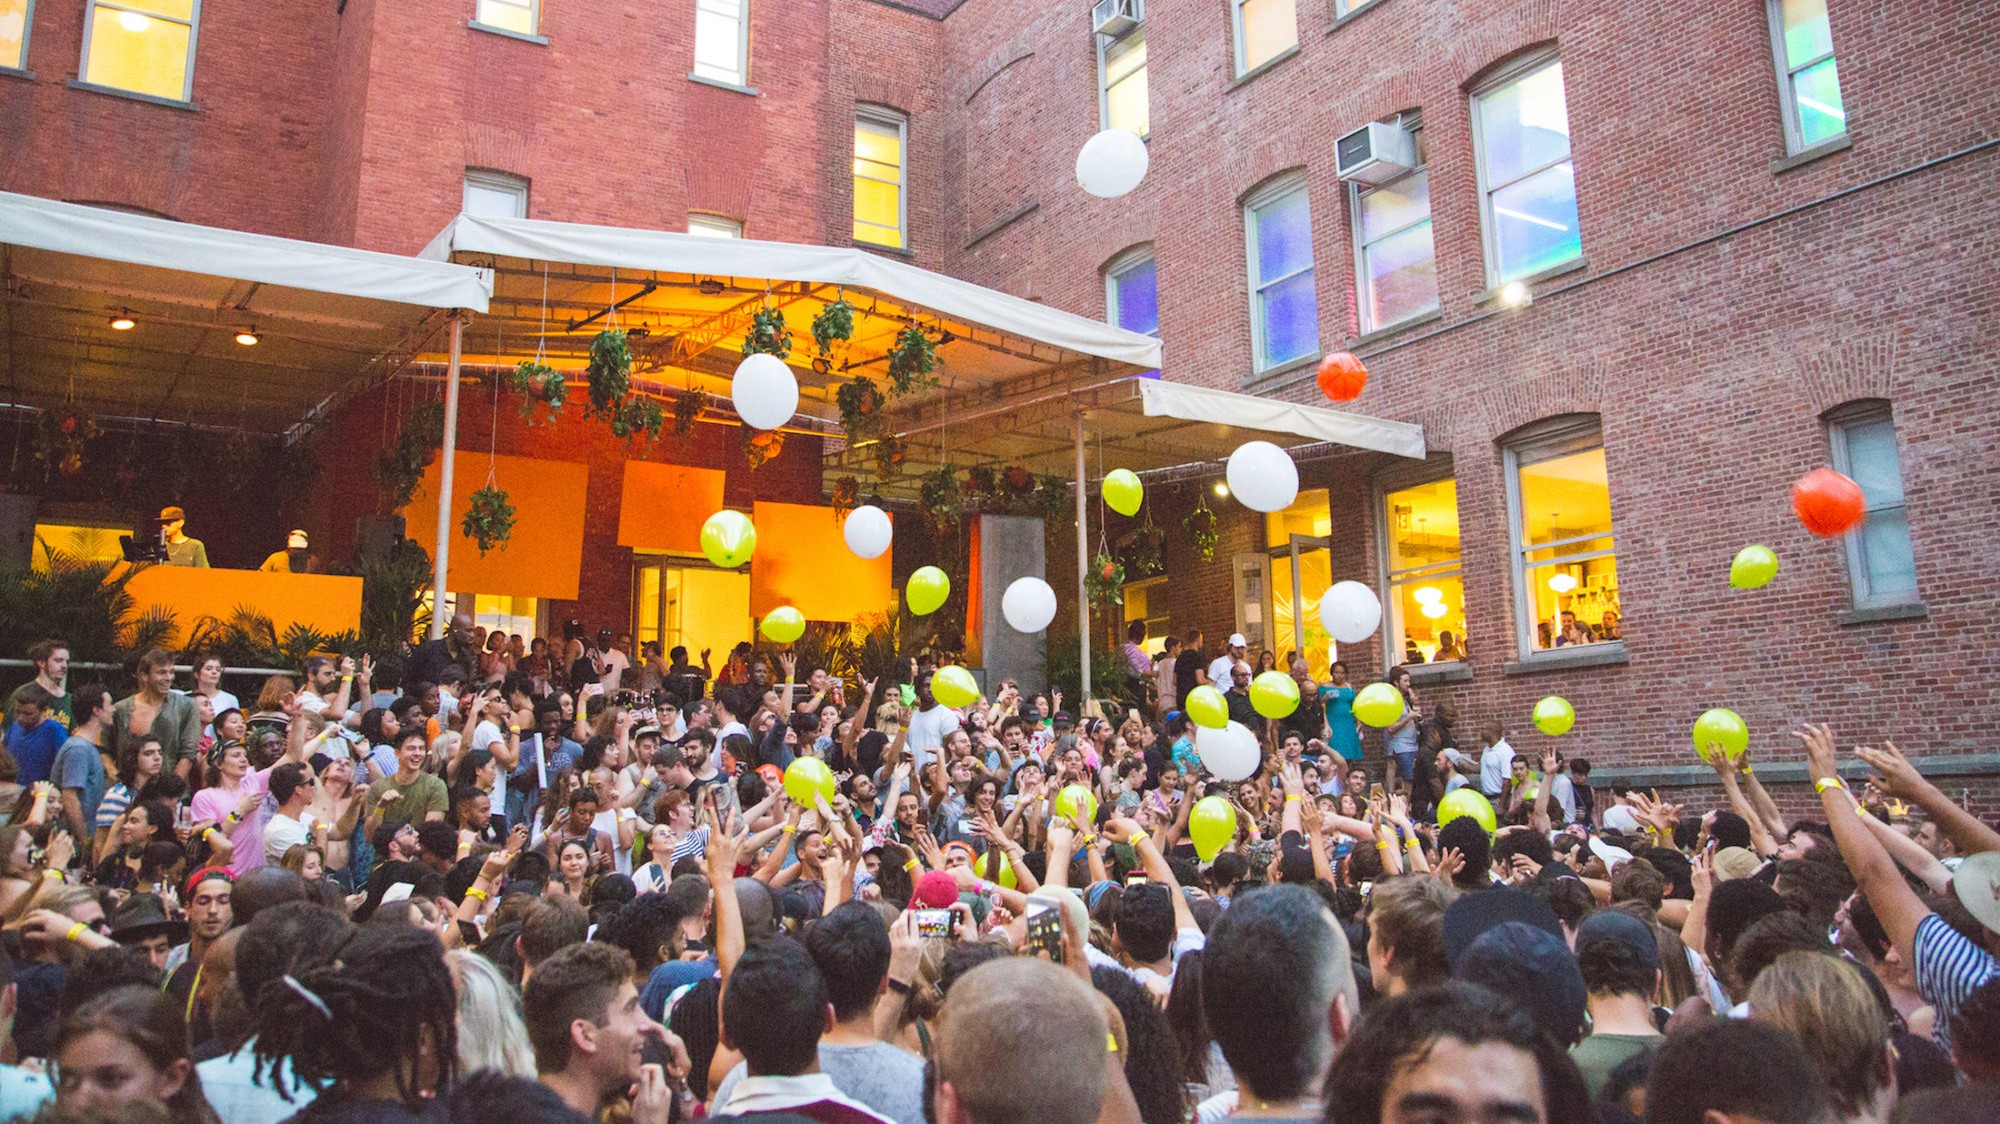 solo bronze For pokker How 'Warm Up' at MoMA ps1 became NYC's best summer festival - i-D